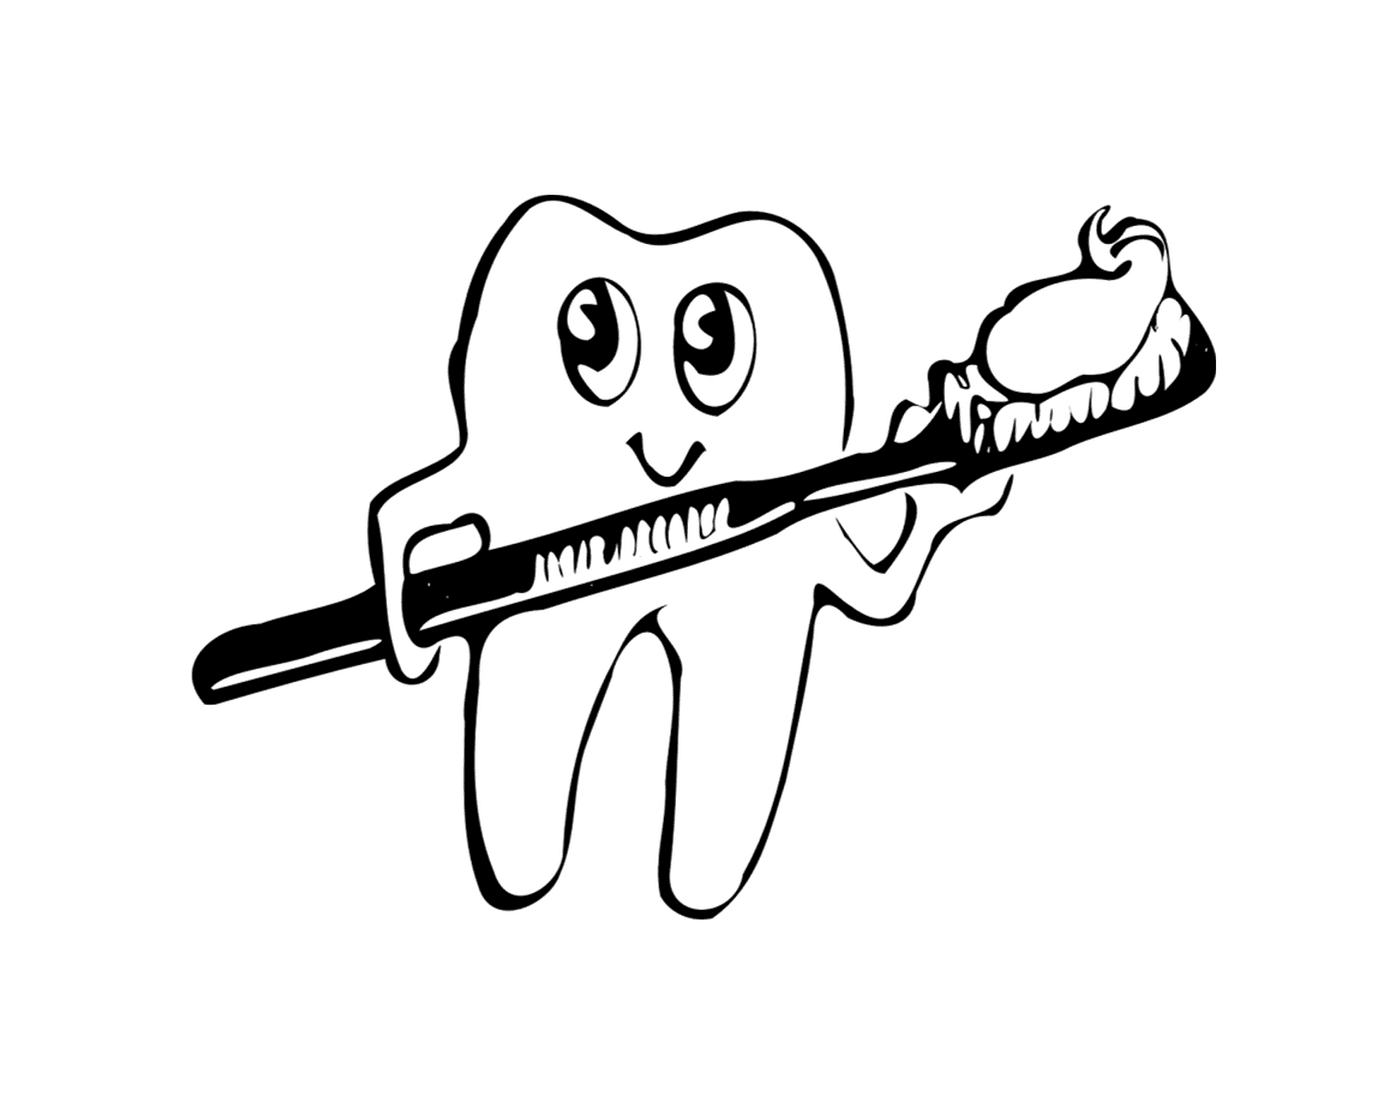  Tooth holding a toothbrush 